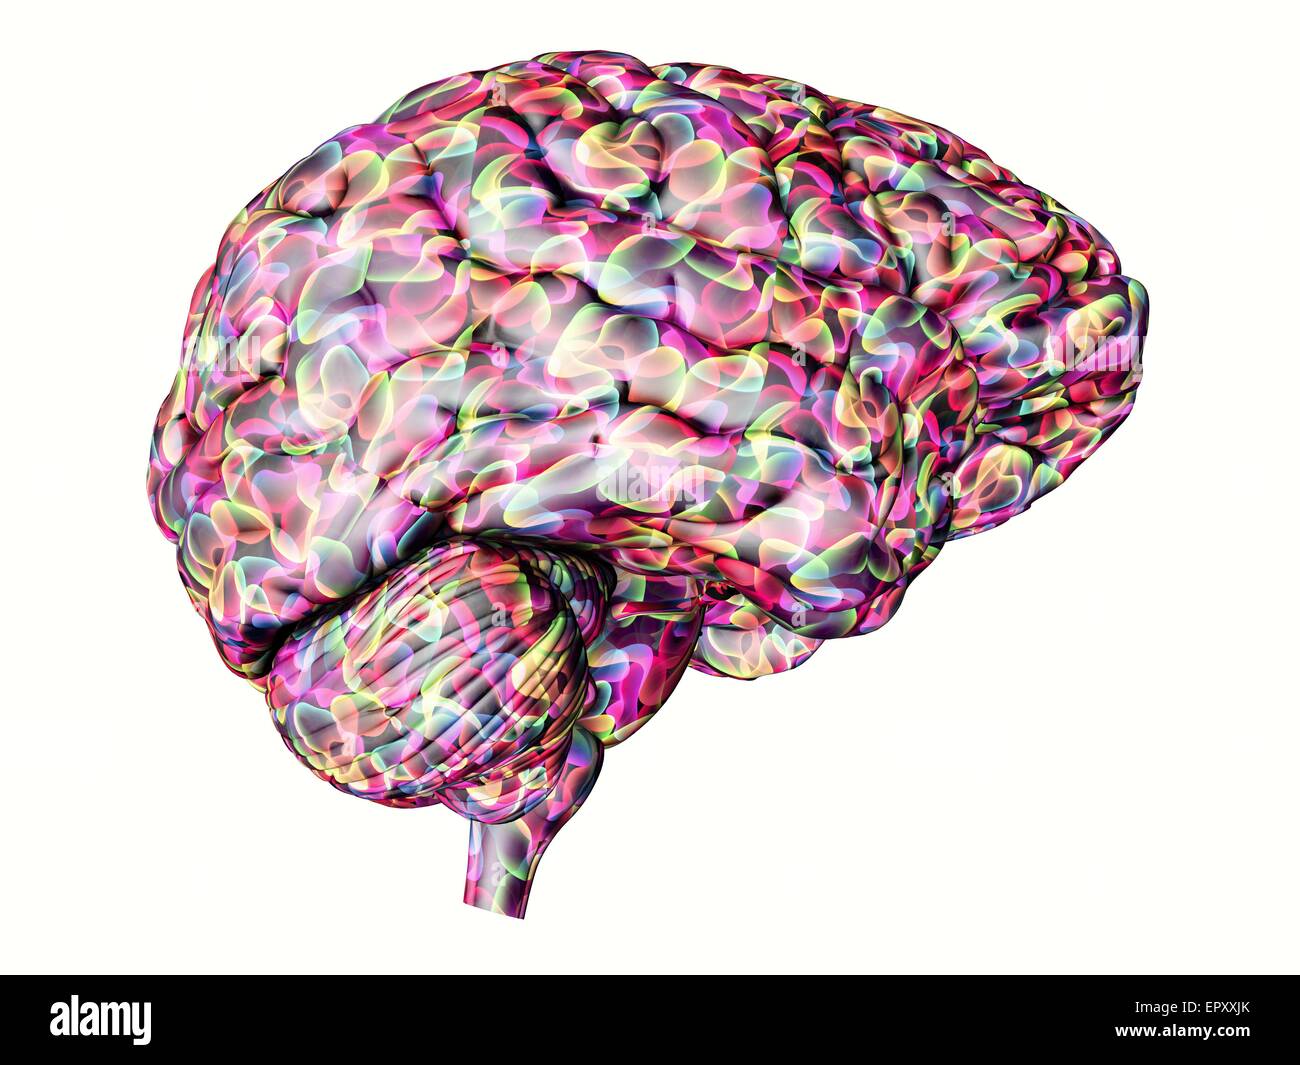 Brain. Abstract computer artwork of a side view of a human brain. Stock Photo